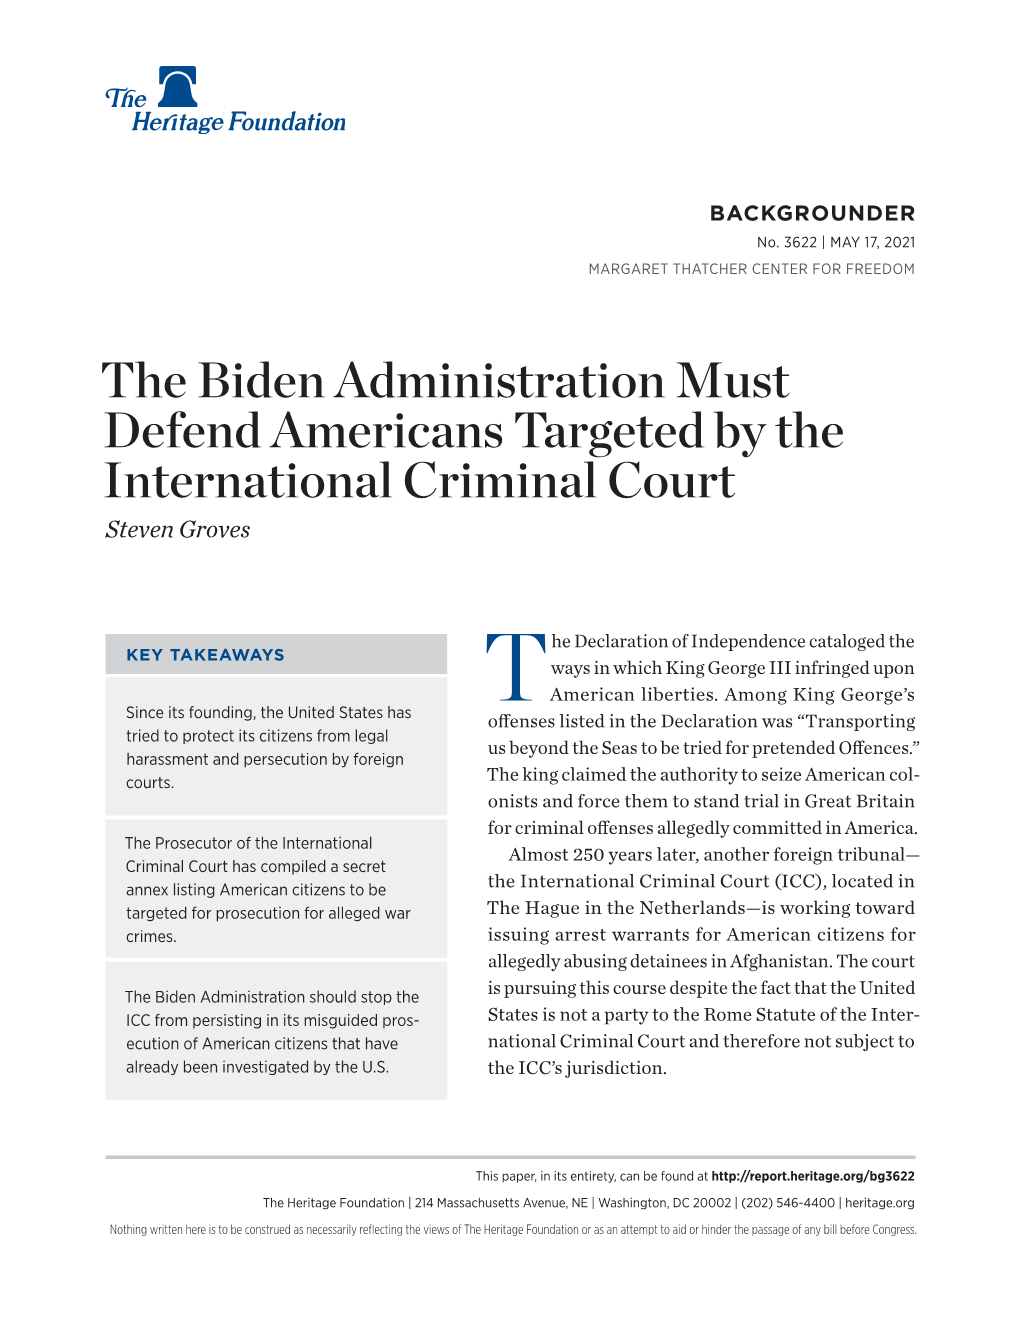 The Biden Administration Must Defend Americans Targeted by the International Criminal Court Steven Groves